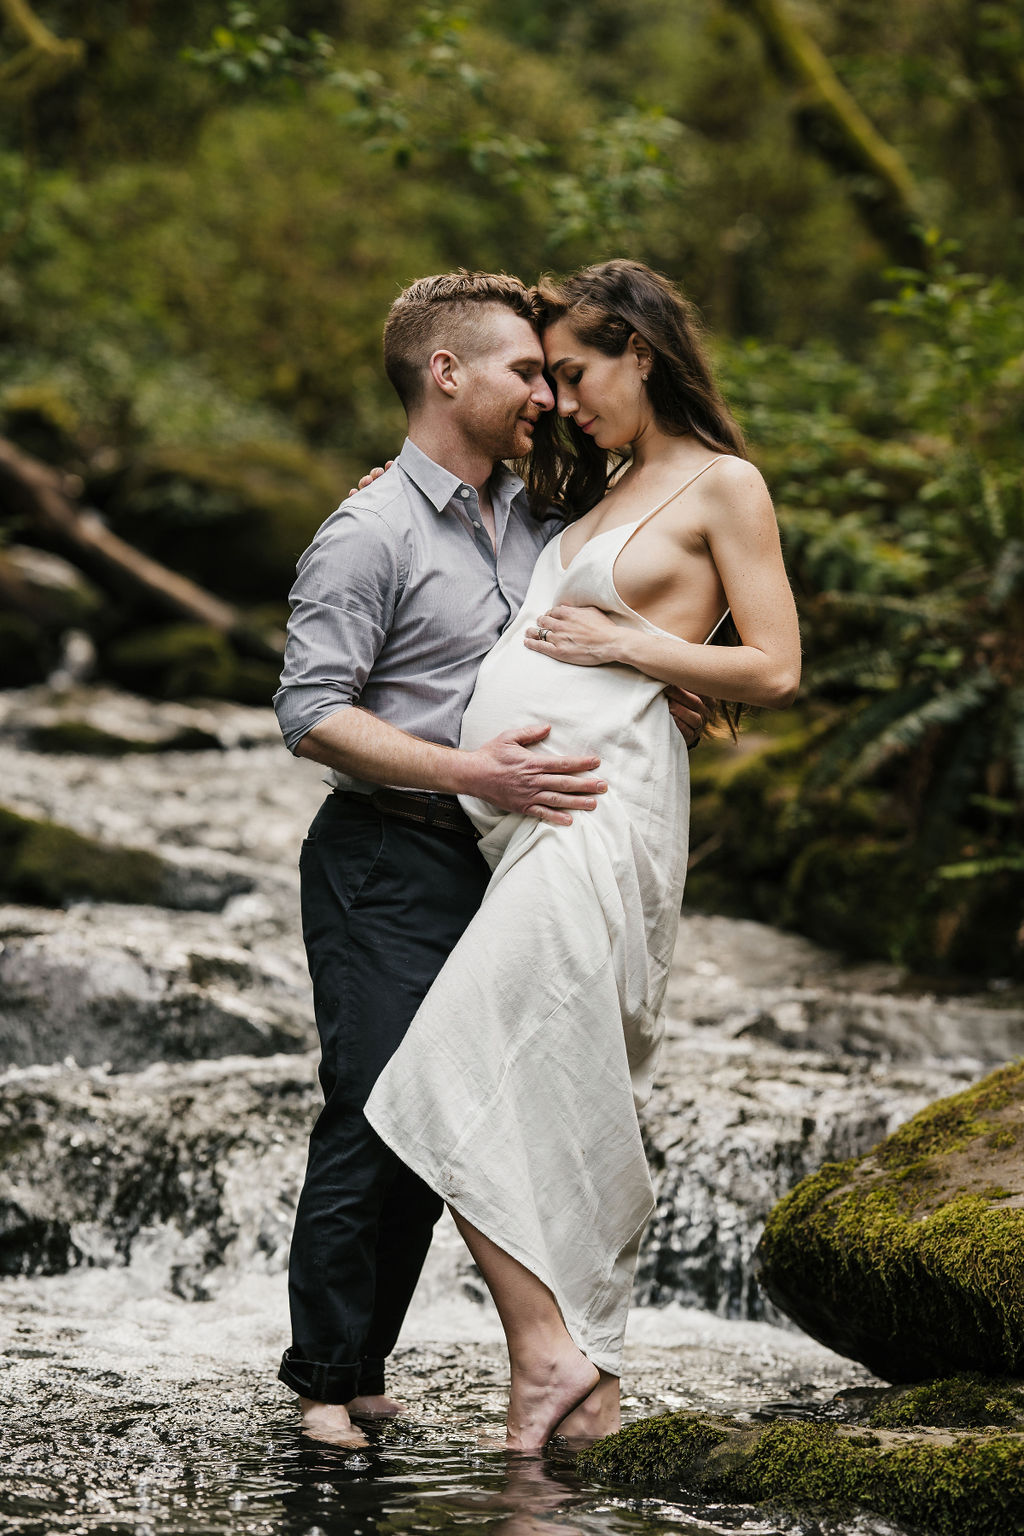 Maternity Photography by Natalie Broders at Marshall Park in Portland, OR - May